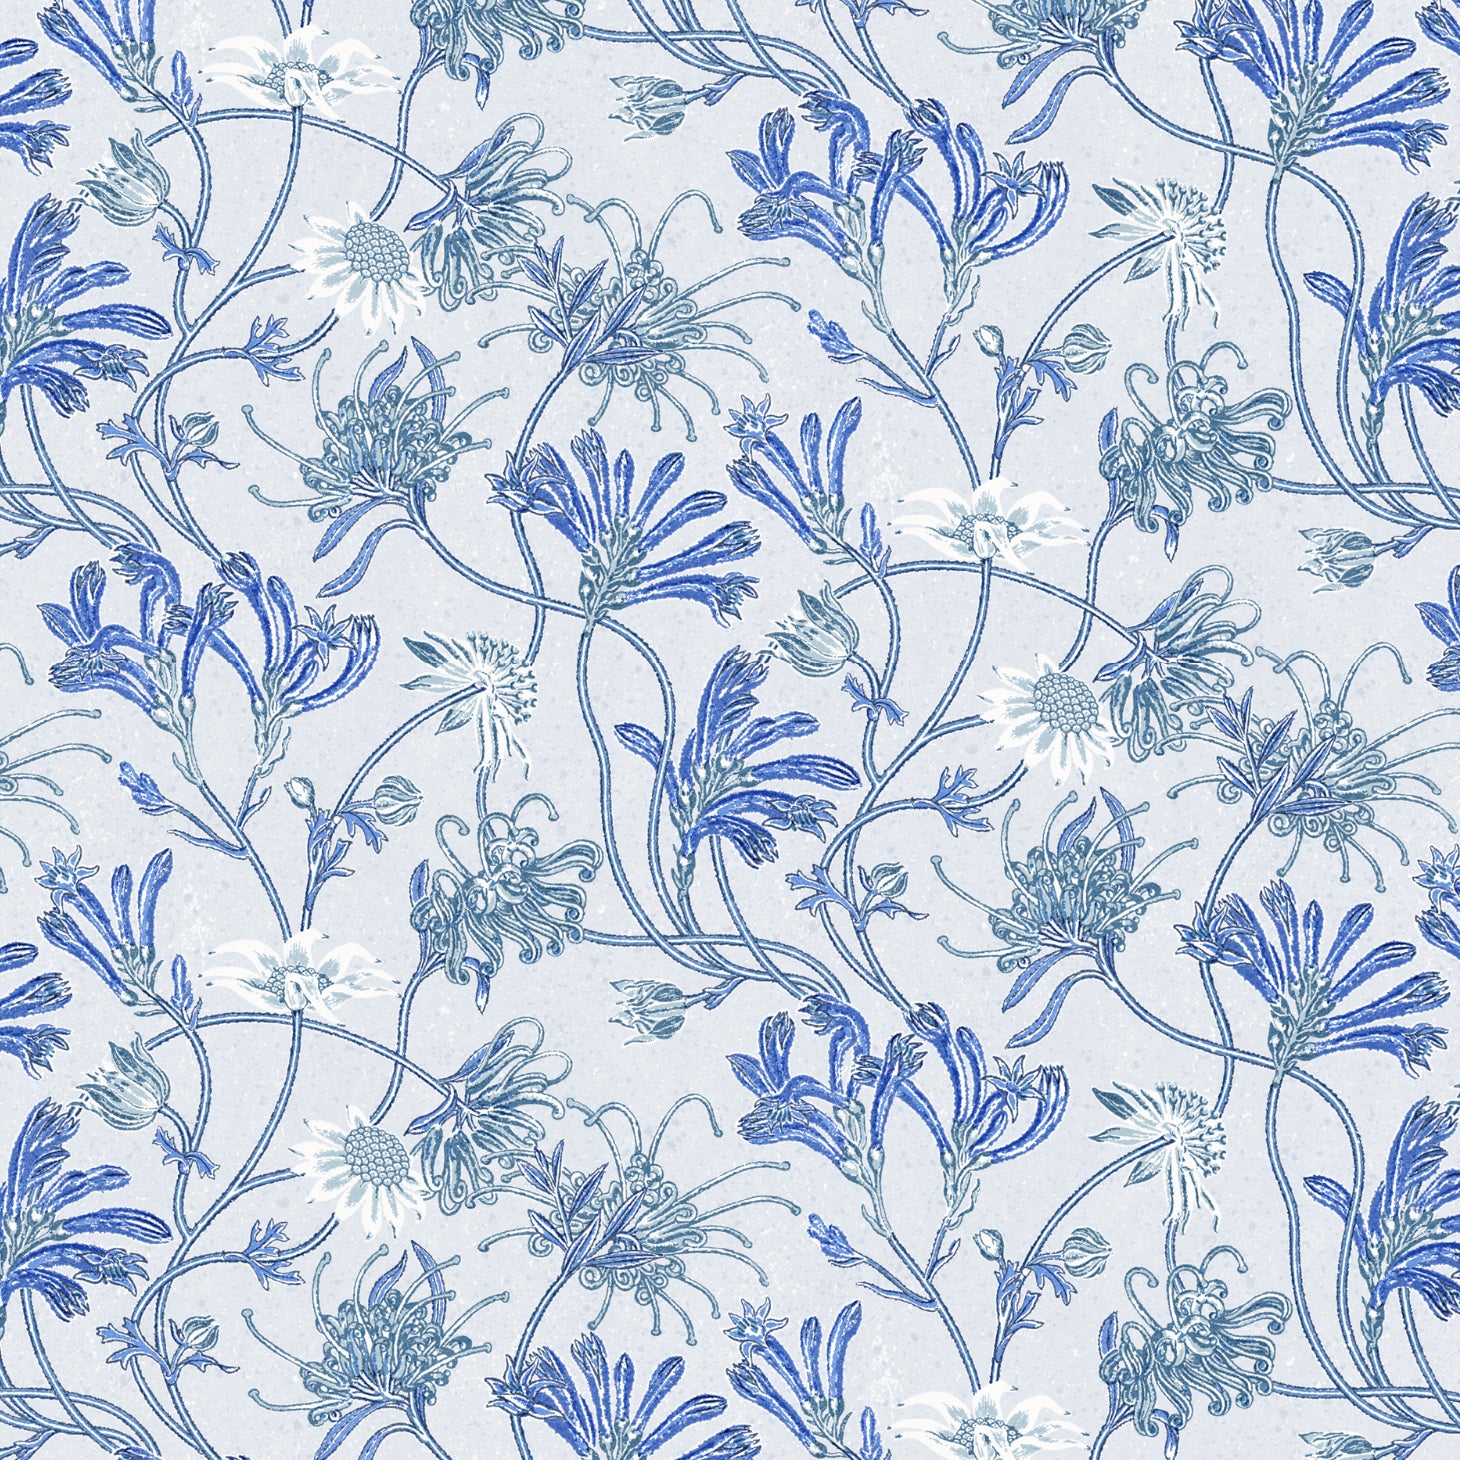 Detail of wallpaper in a painterly floral print in shades of white, blue and navy on a light blue field.